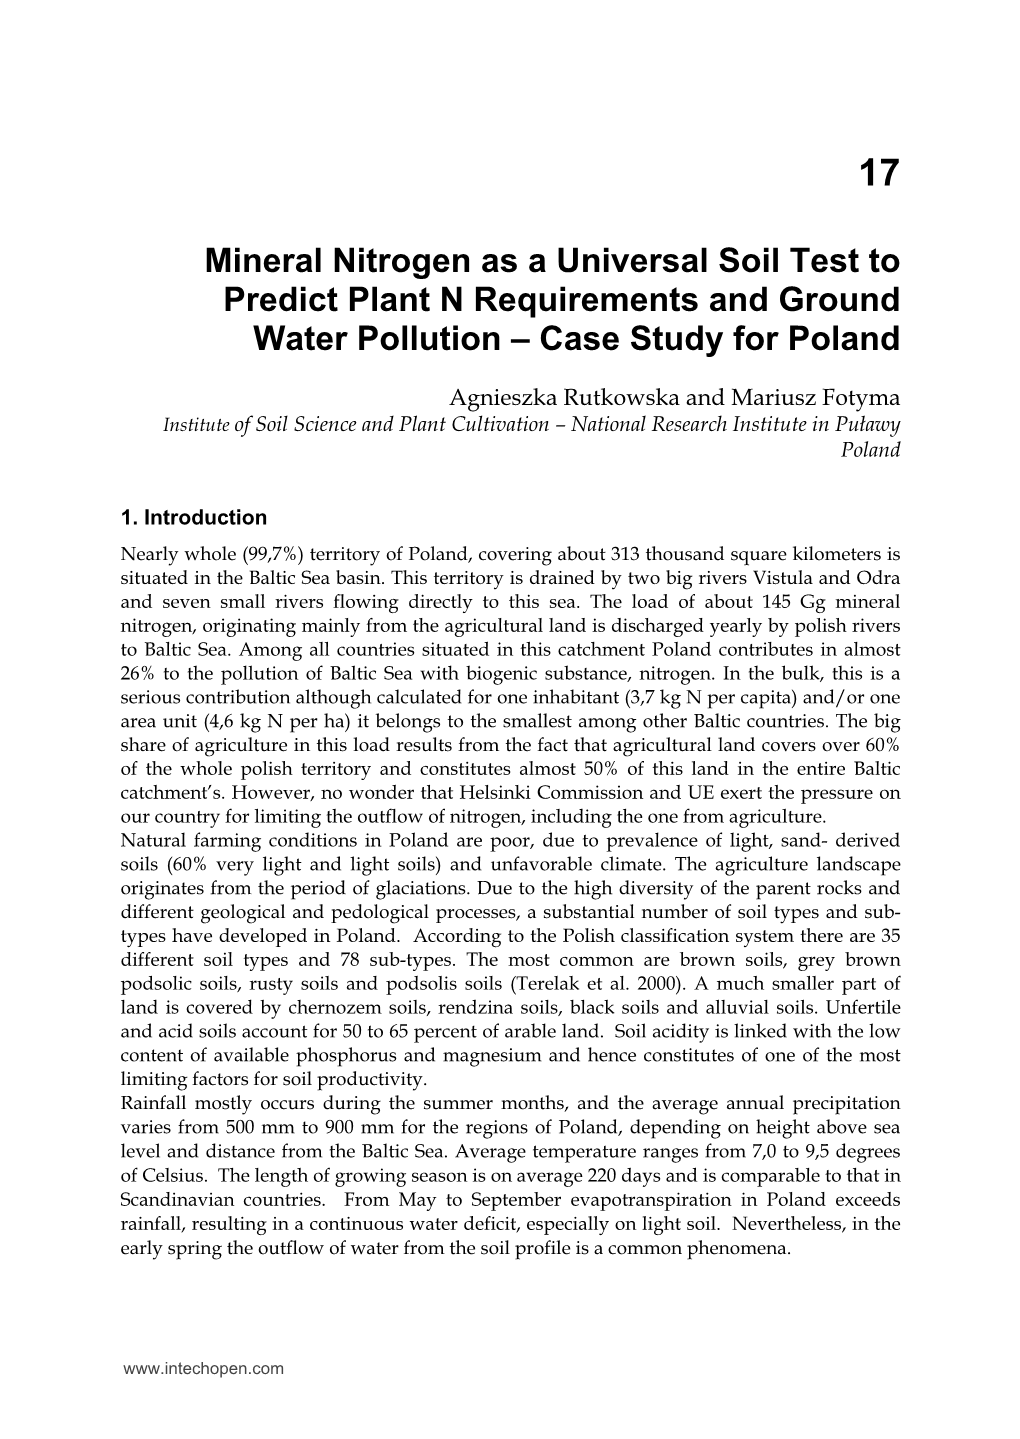 Mineral Nitrogen As a Universal Soil Test to Predict Plant N Requirements and Ground Water Pollution – Case Study for Poland